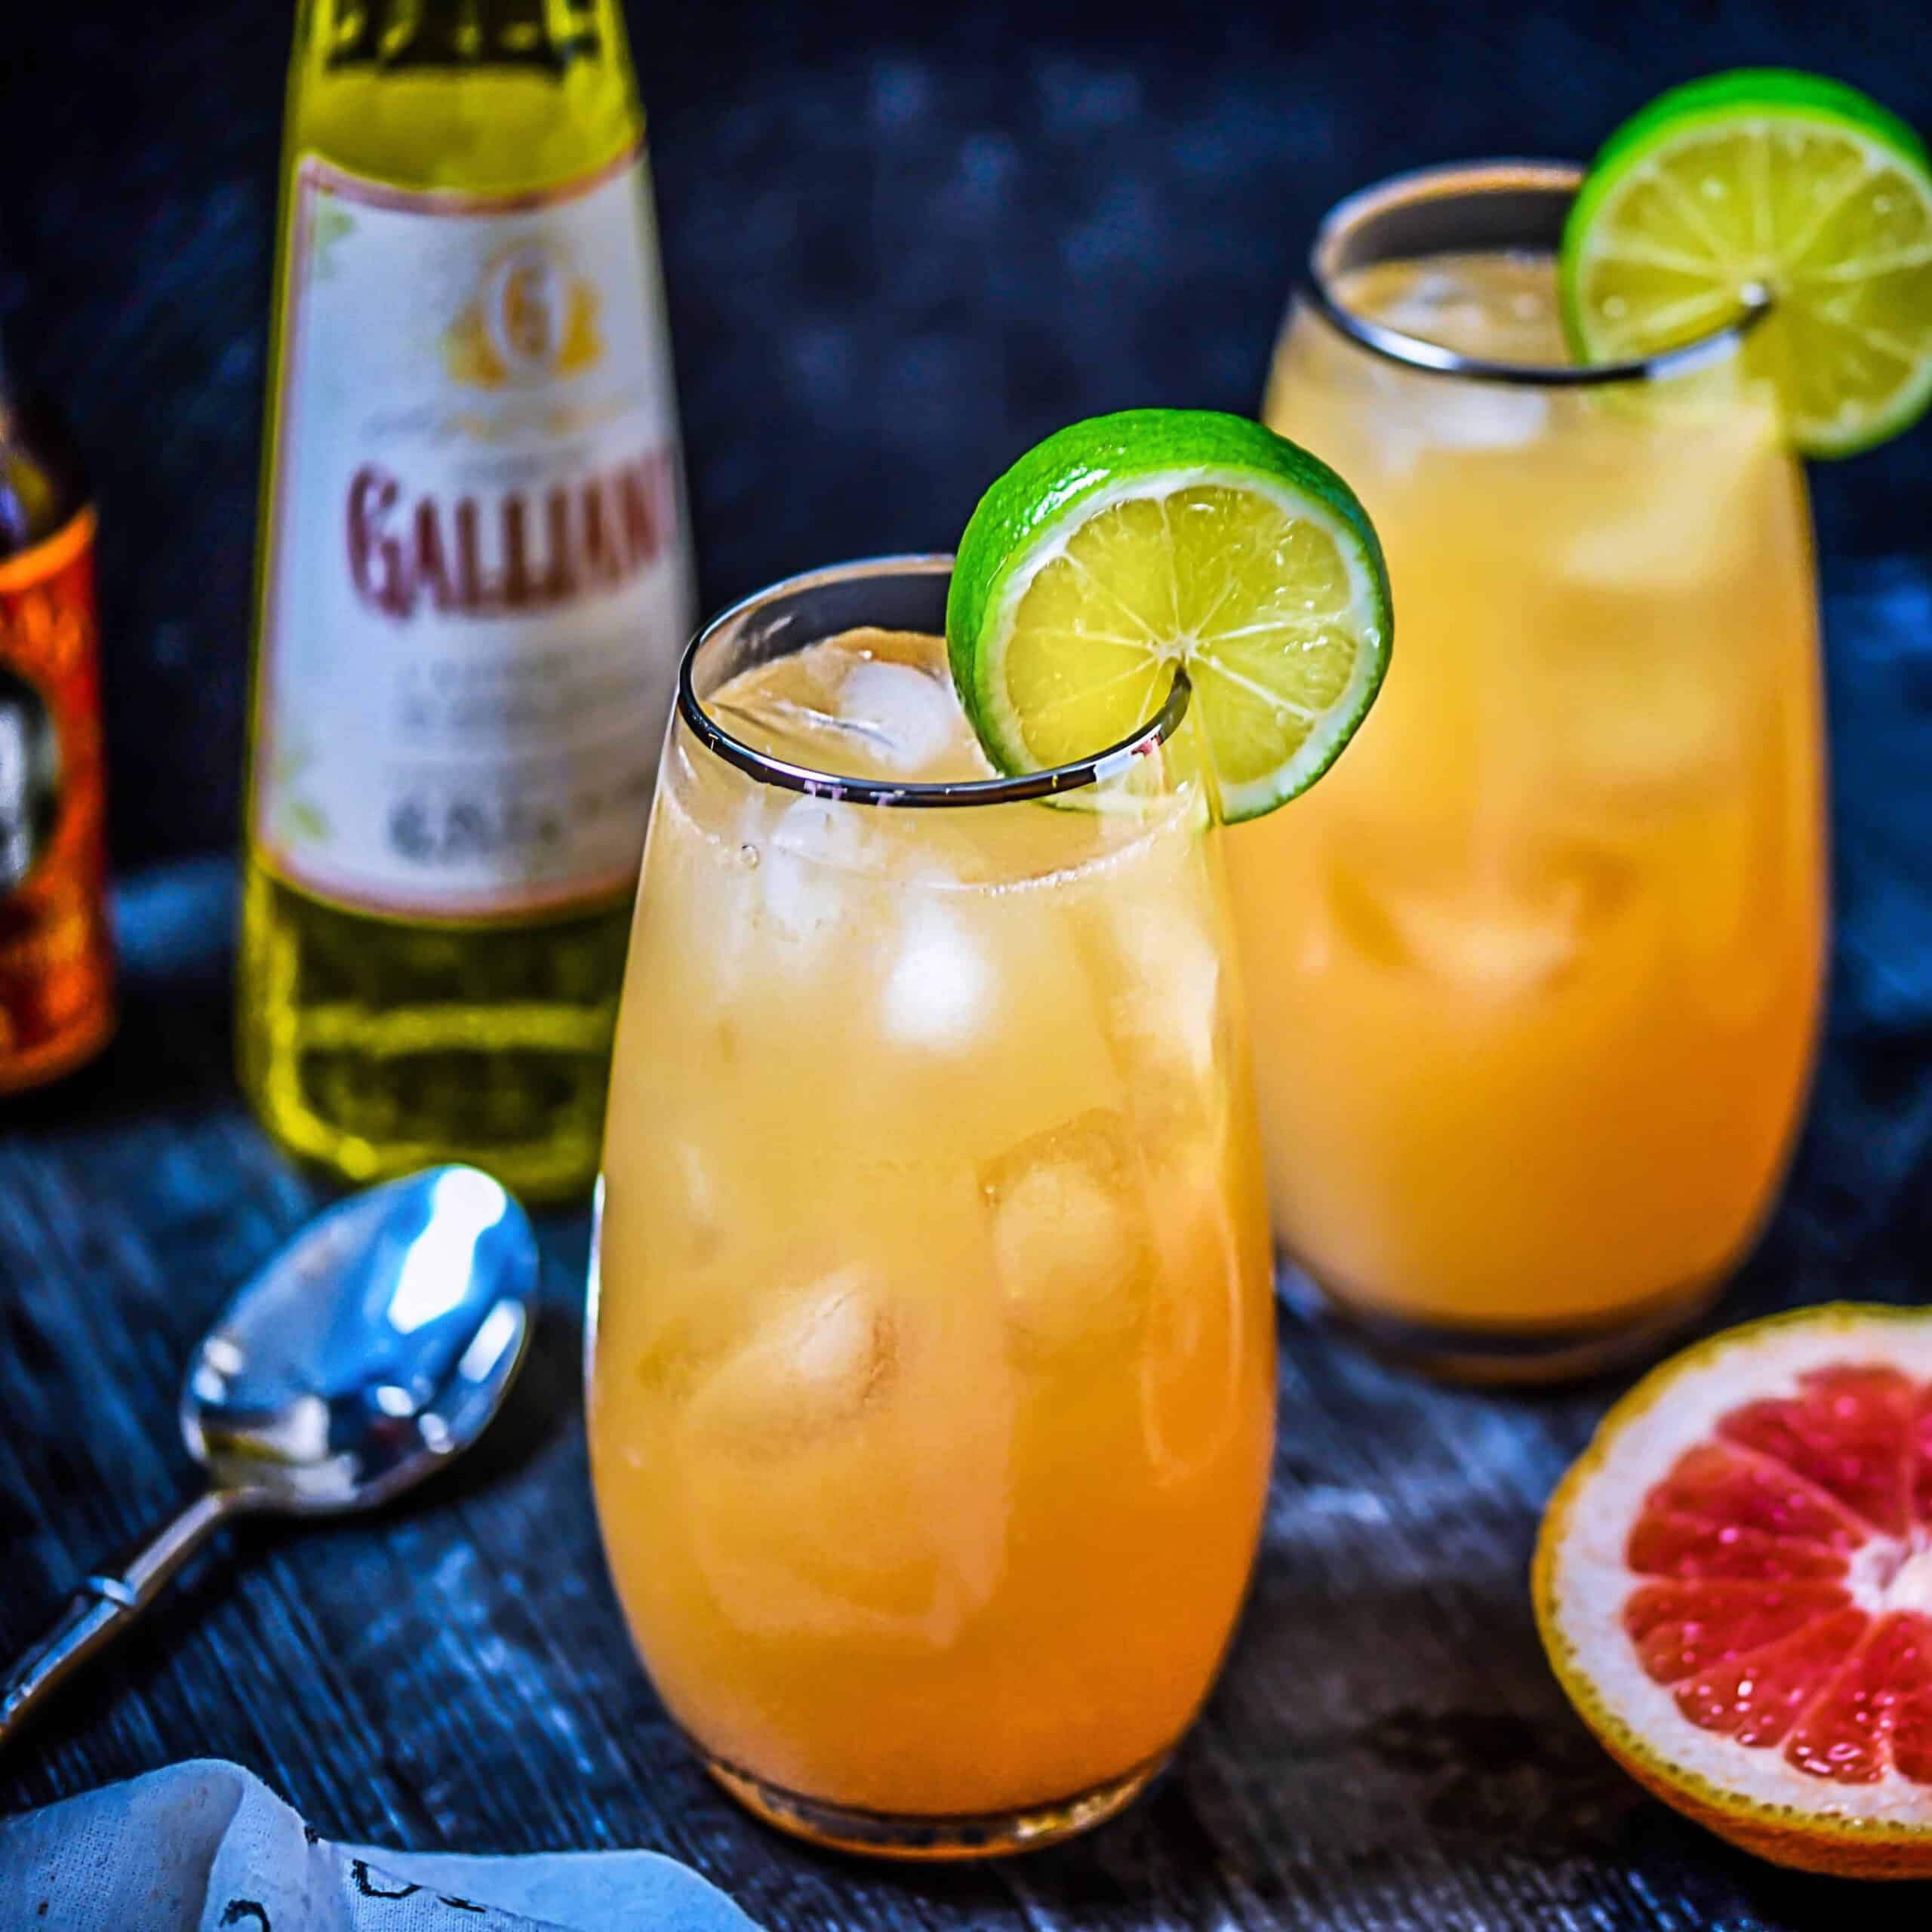 Tequila Wallbanger